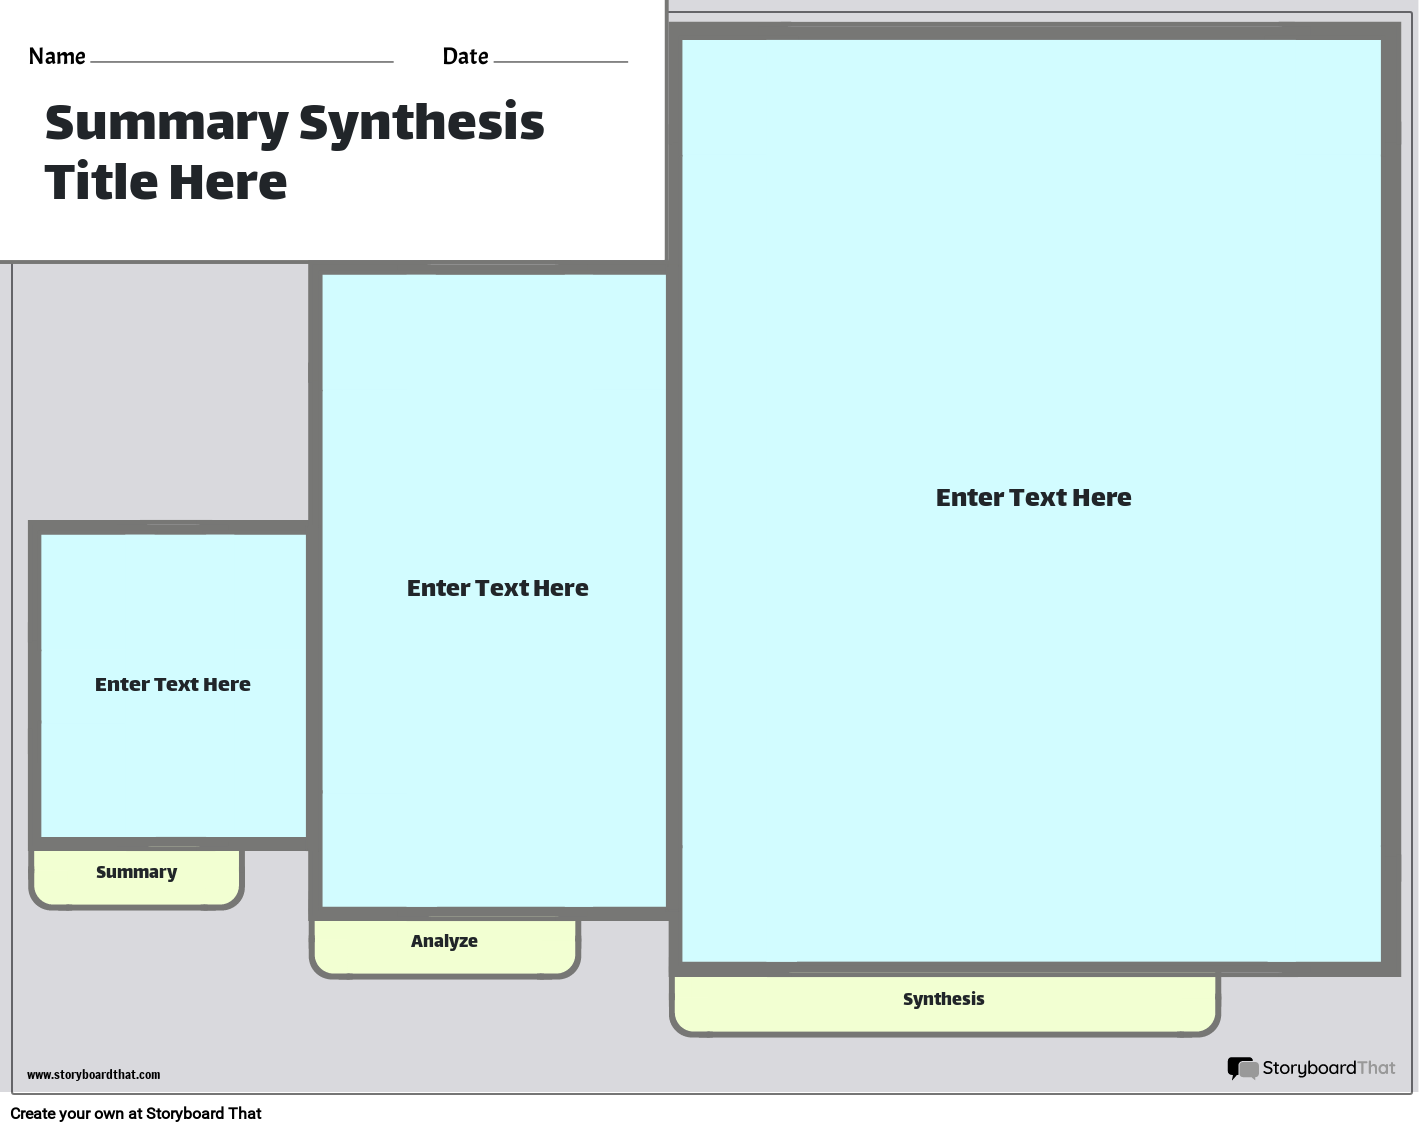 Summary & Synthesis Template with Blue Boxes